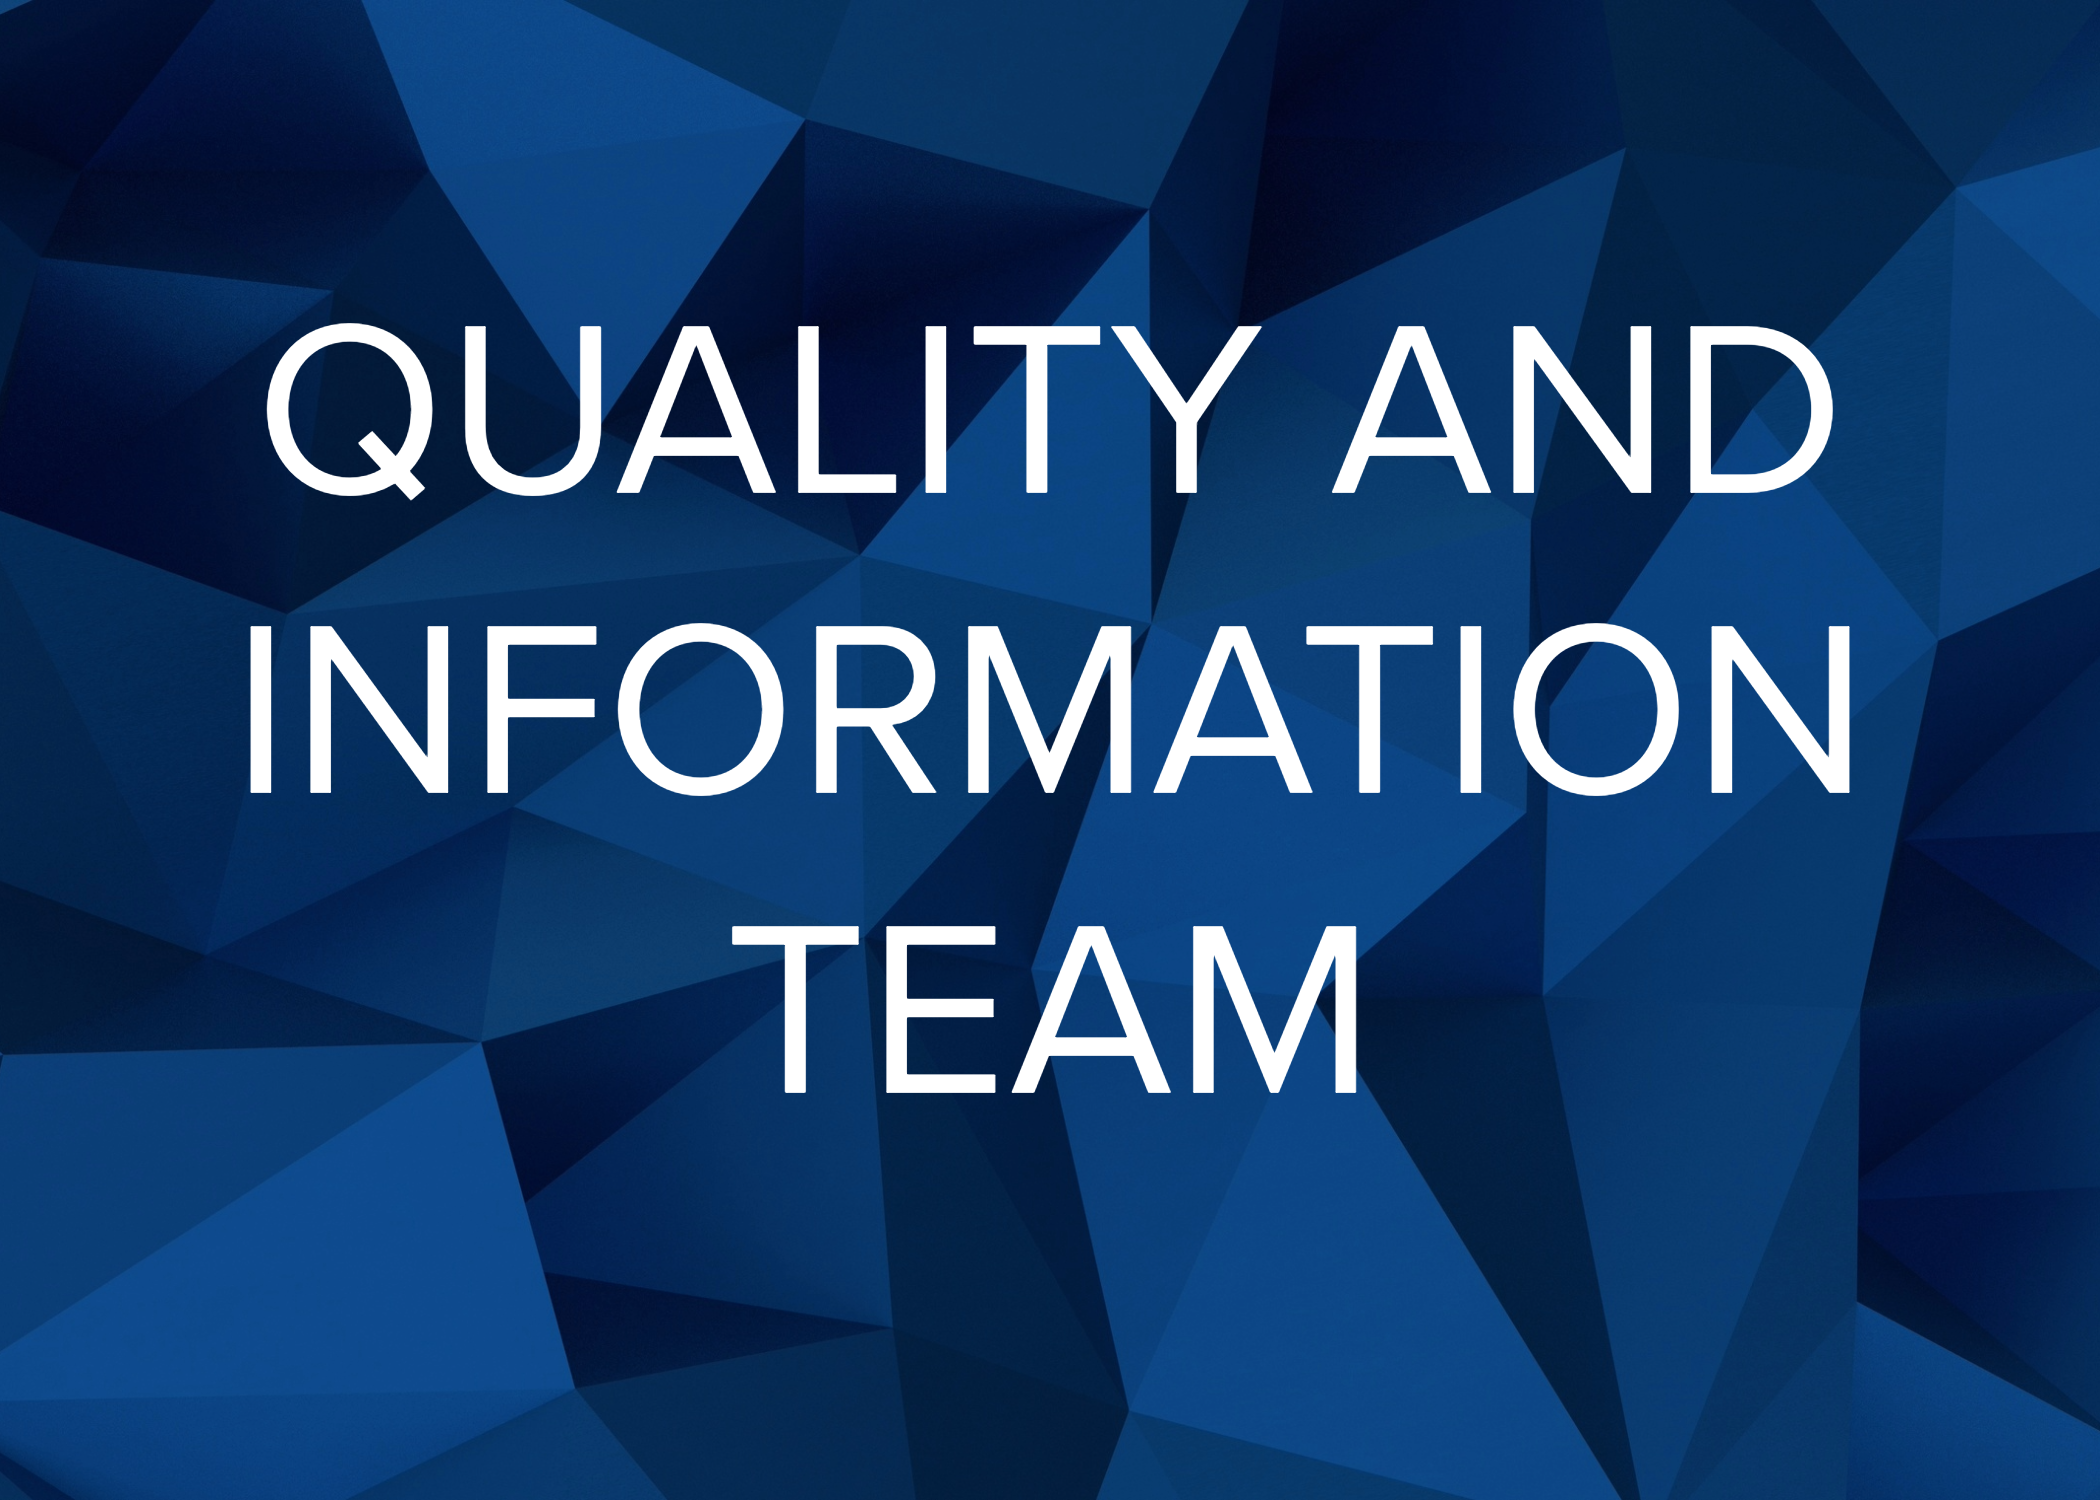 Quality and Information Team